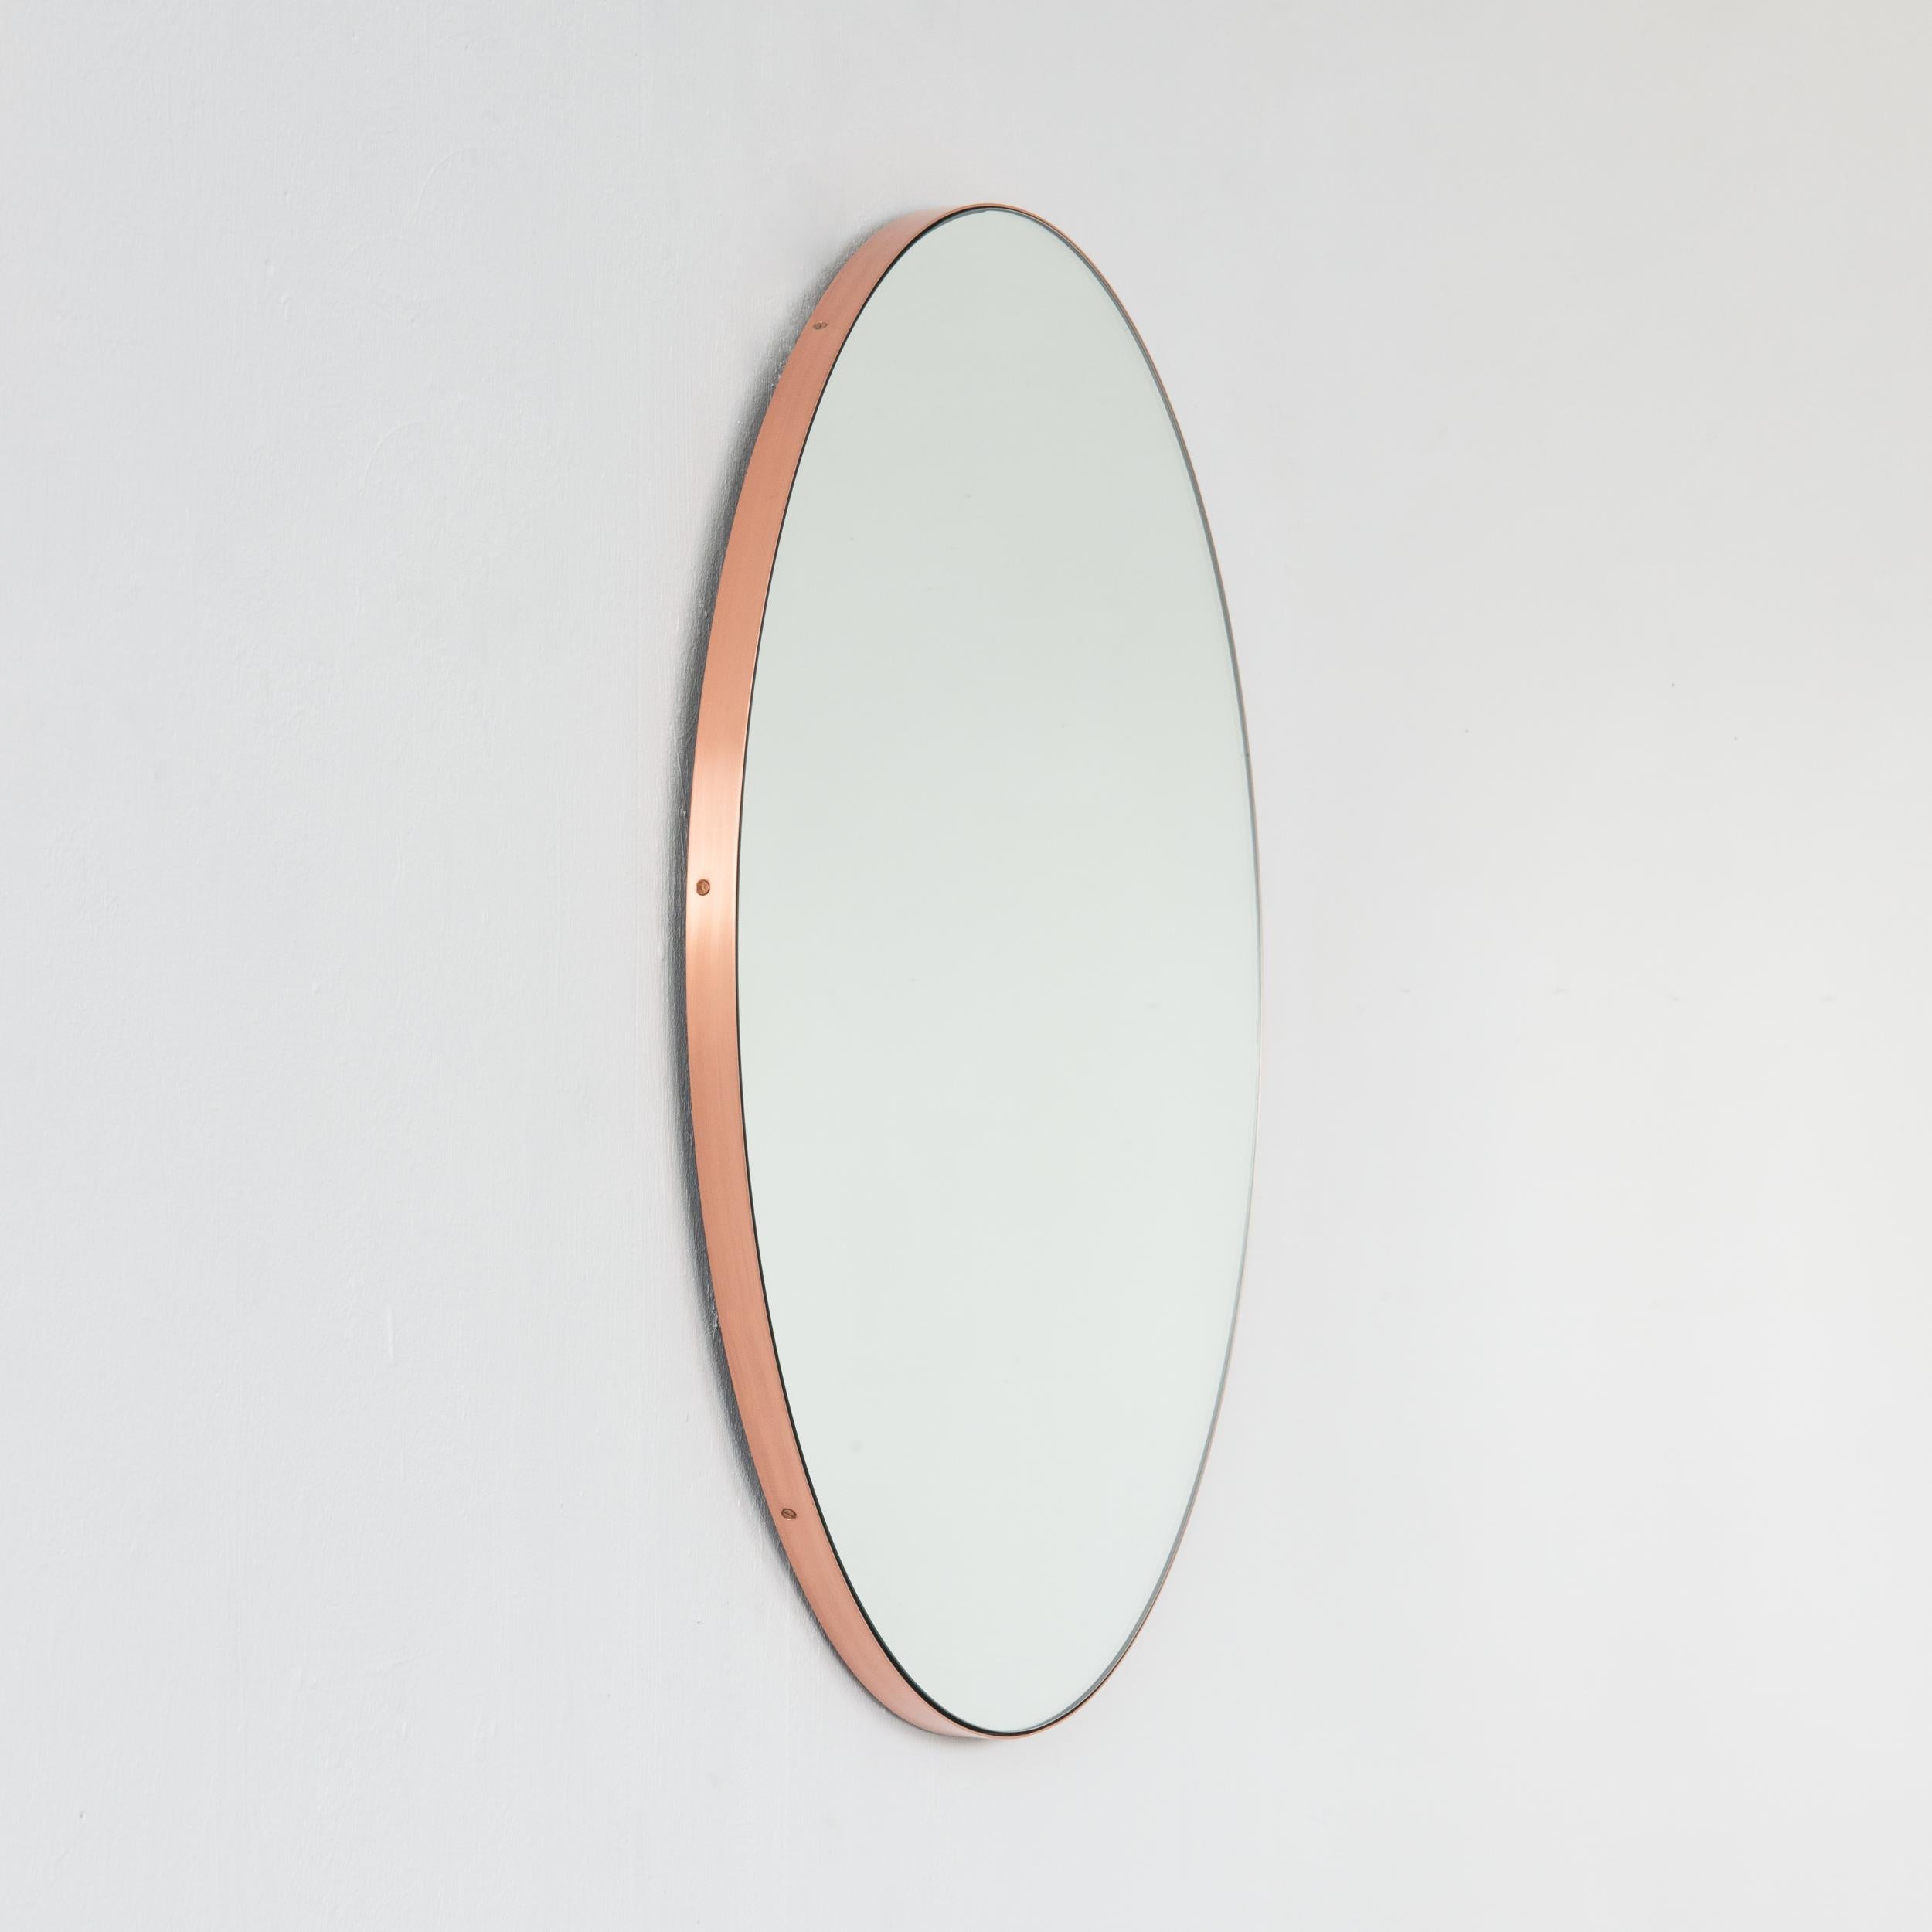 Orbis Round Contemporary Mirror with Copper Frame, Medium For Sale 3